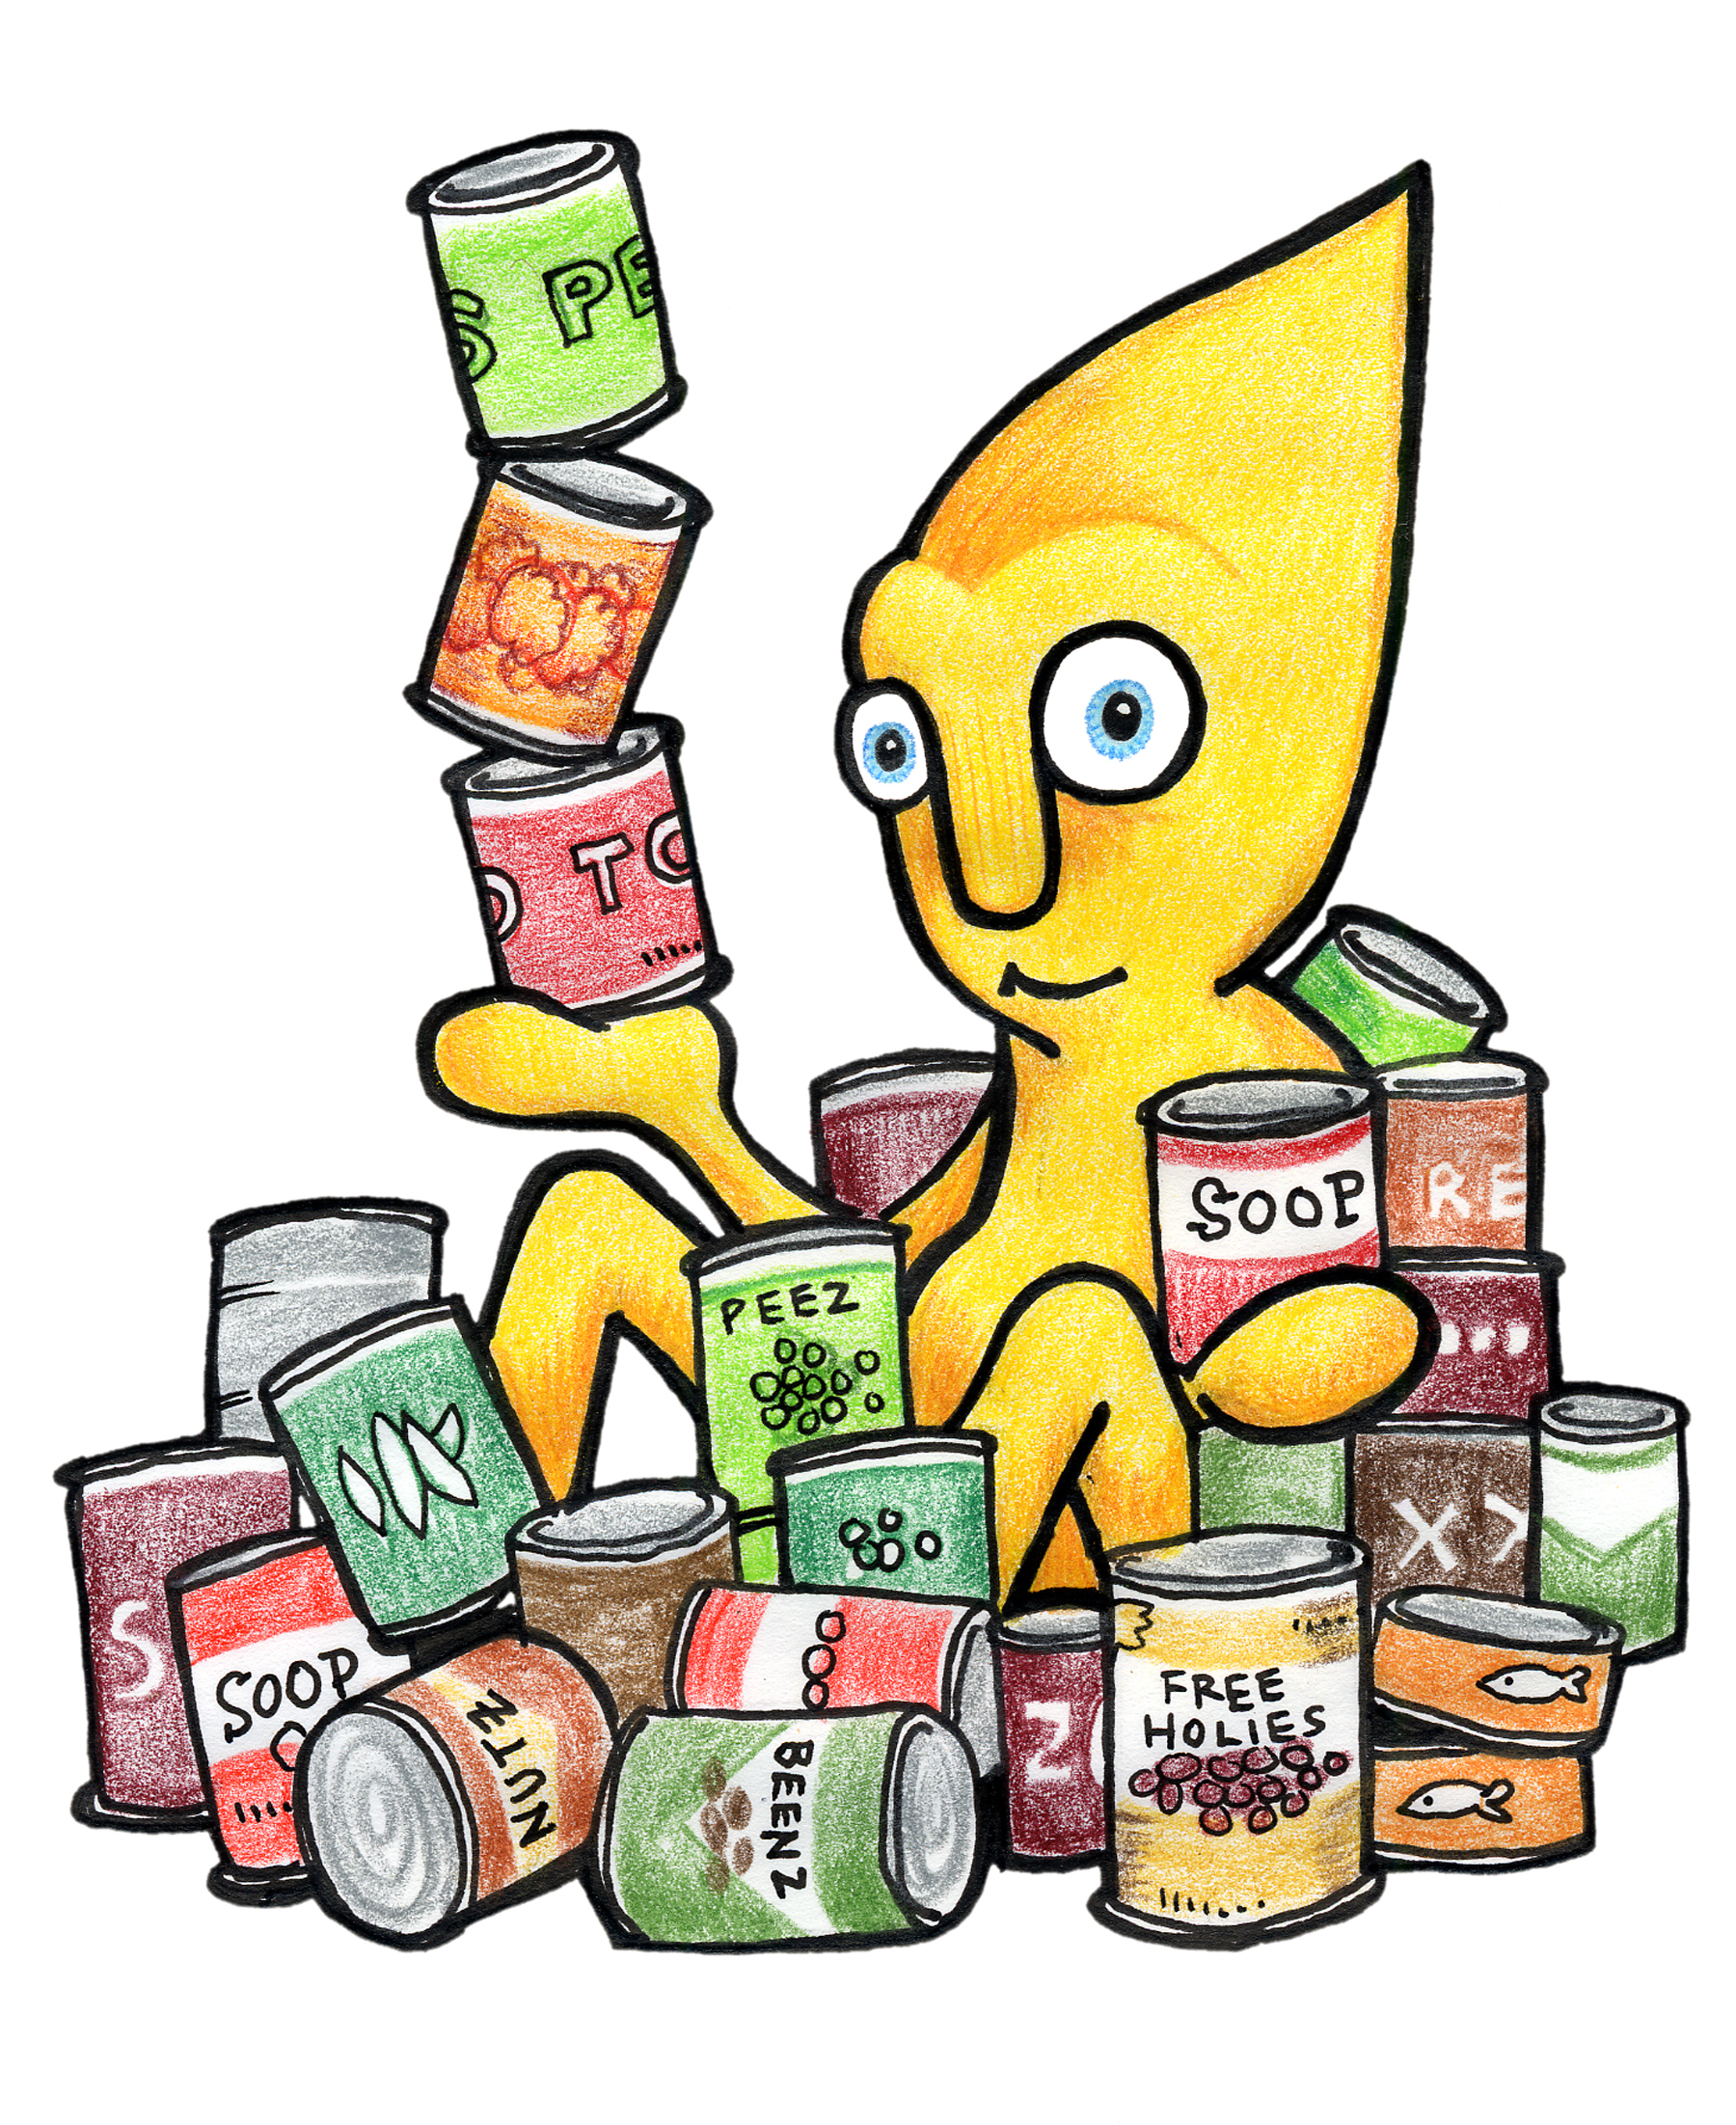 Canned Food Drive Clip Art   Clipart Best